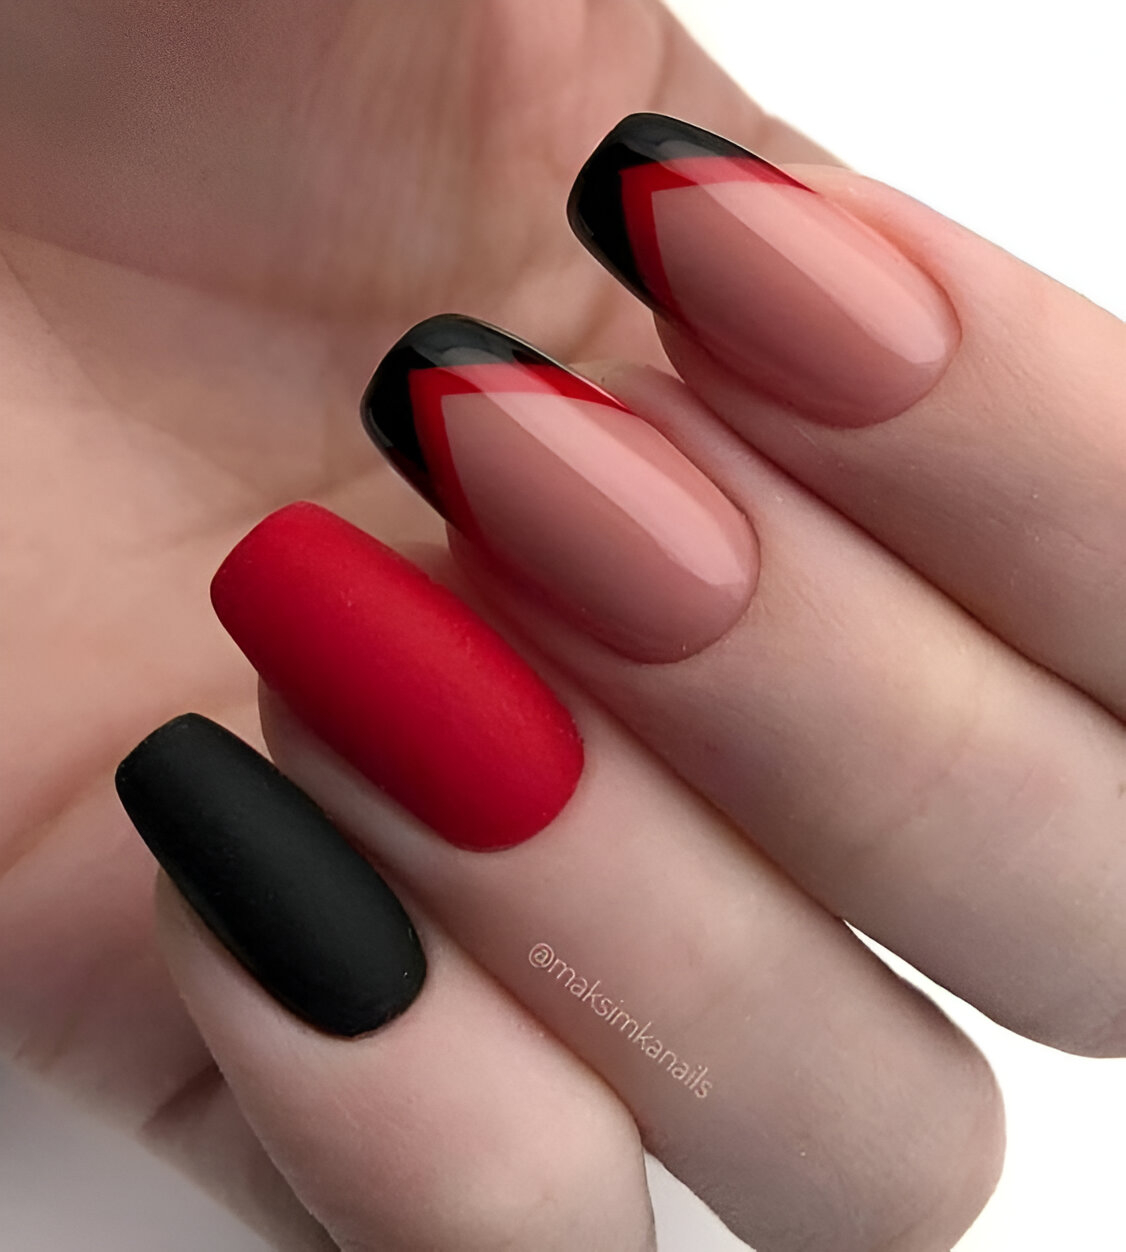 Chic Minimalistic Black And Red Nails